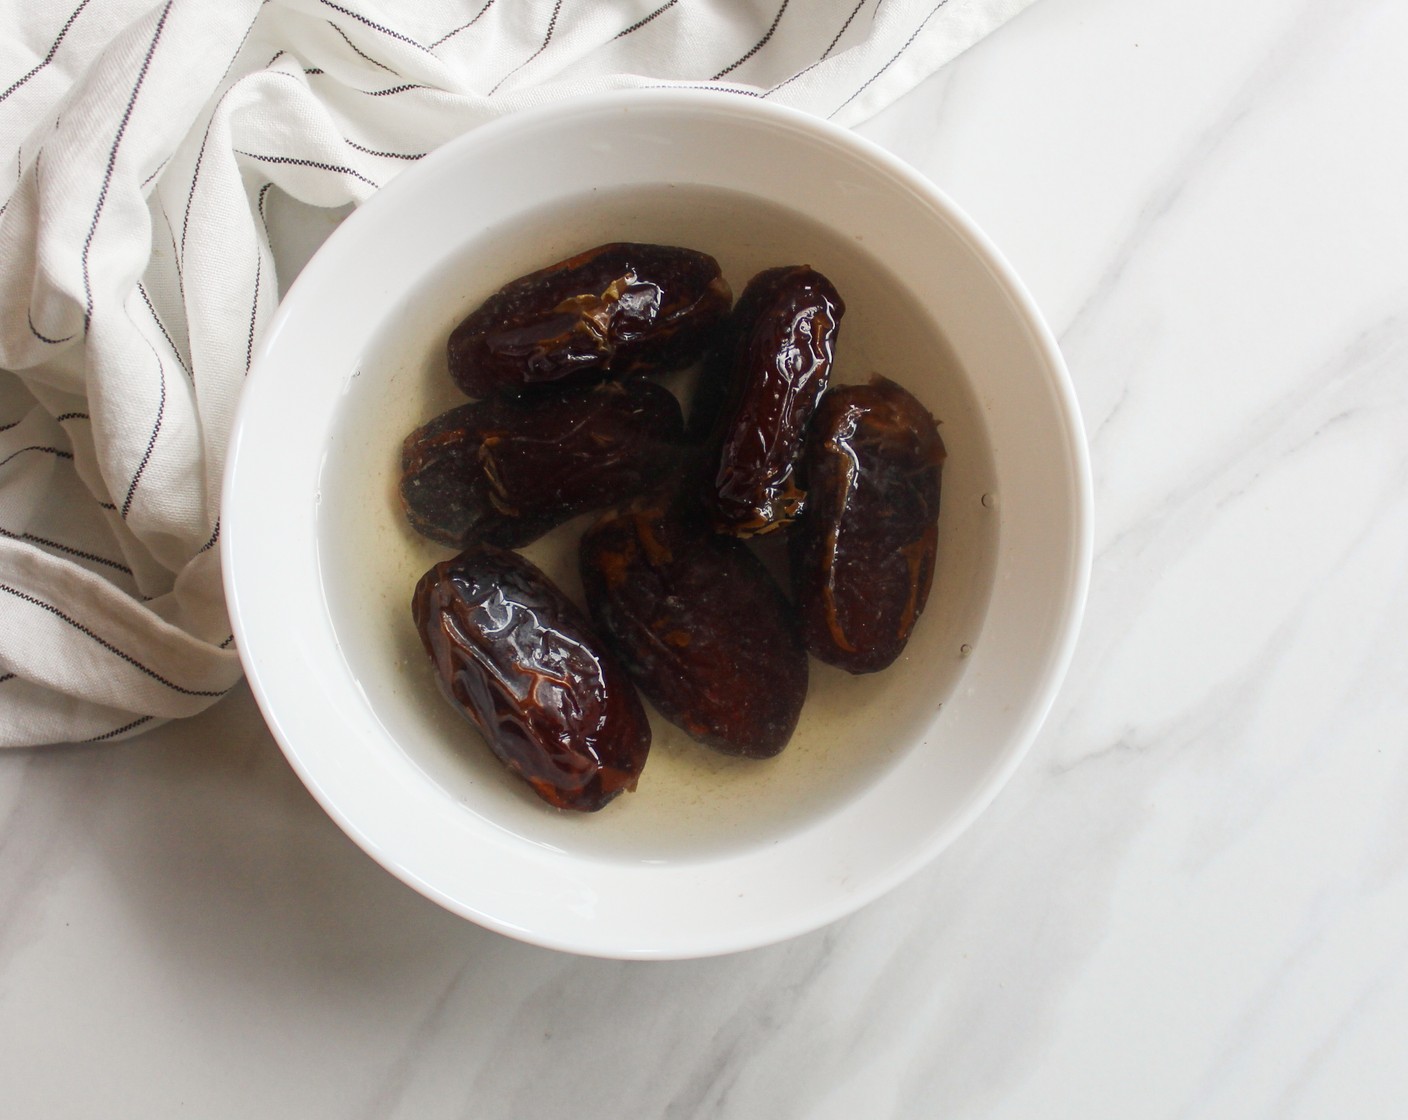 step 1 Soak the Dates (3/4 cup) in hot water for at least 20 minutes to soften them. Pit them and set aside.